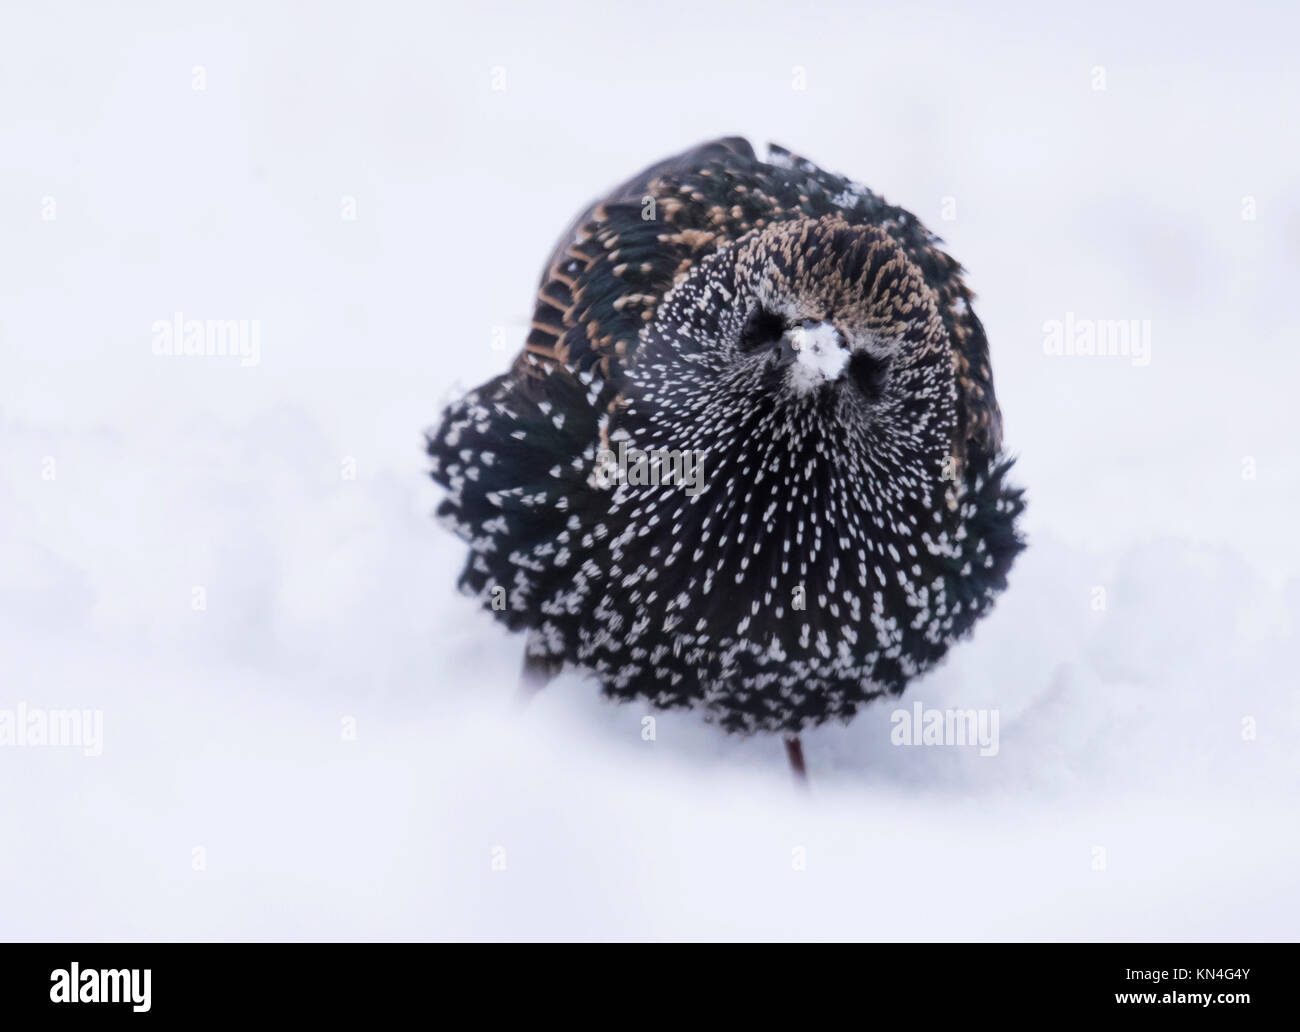 A Starling (Sturnus vulgaris) searches the snow covered ground for food, Warwickshire Stock Photo